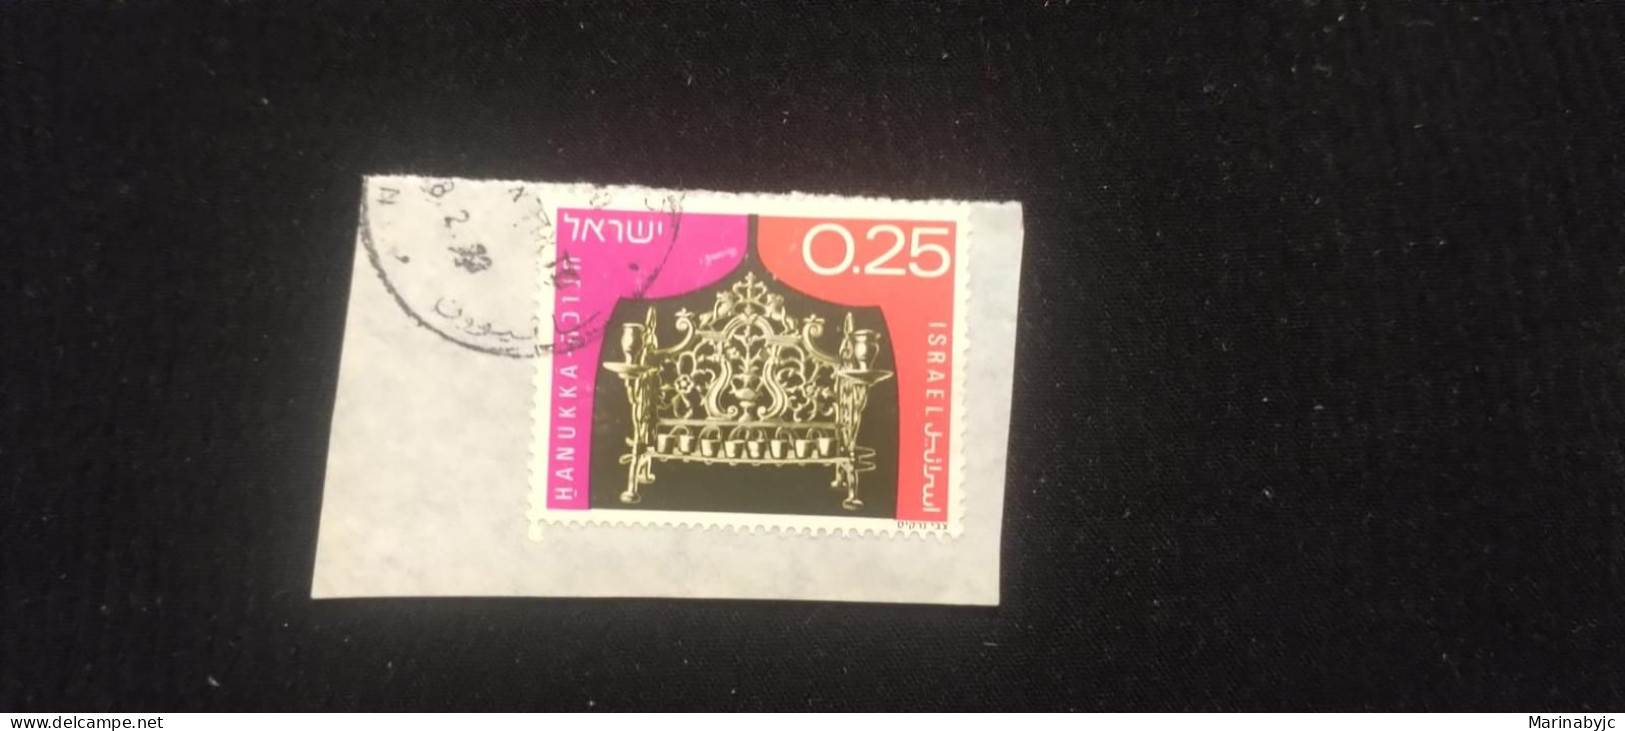 C) 569. 1972. ISRAEL. ENVELOPE SHEET WITH POLAND STAMP, 18TH CENTURY, BRASS. UC. USED. - Otros - Asia